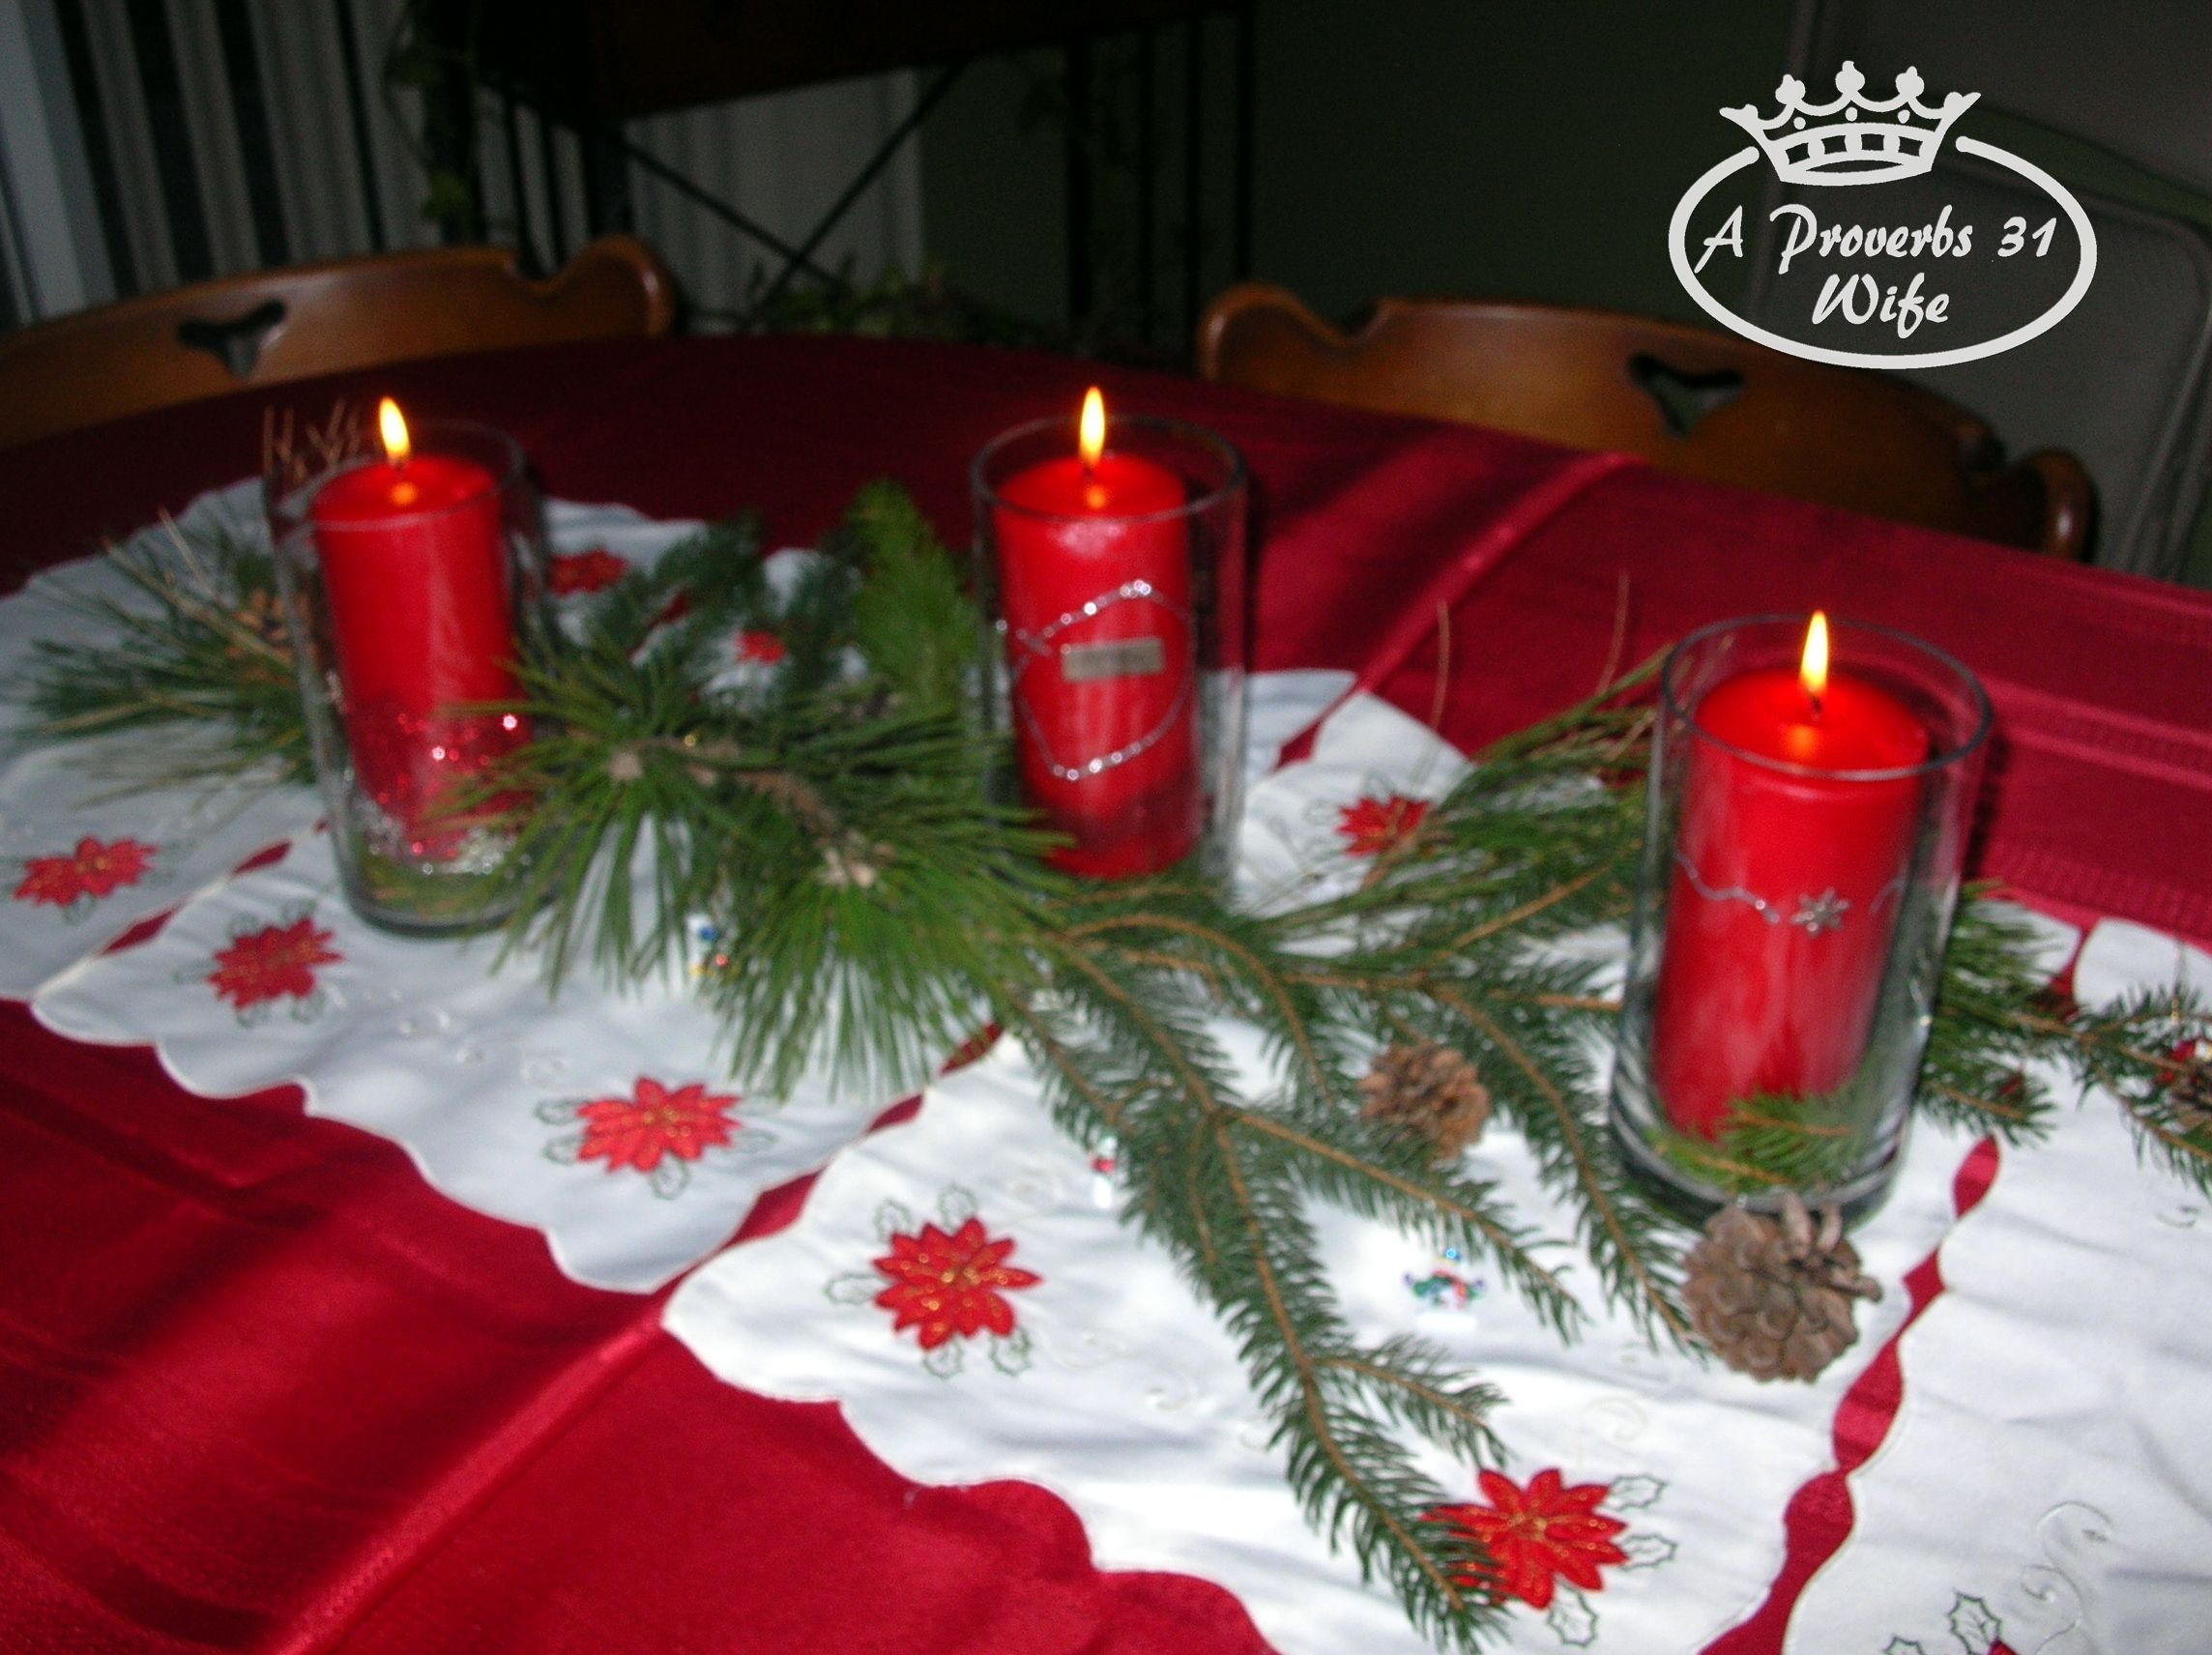 Hosting Christmas Party Ideas
 Hosting a Christmas Party A Proverbs 31 Wife